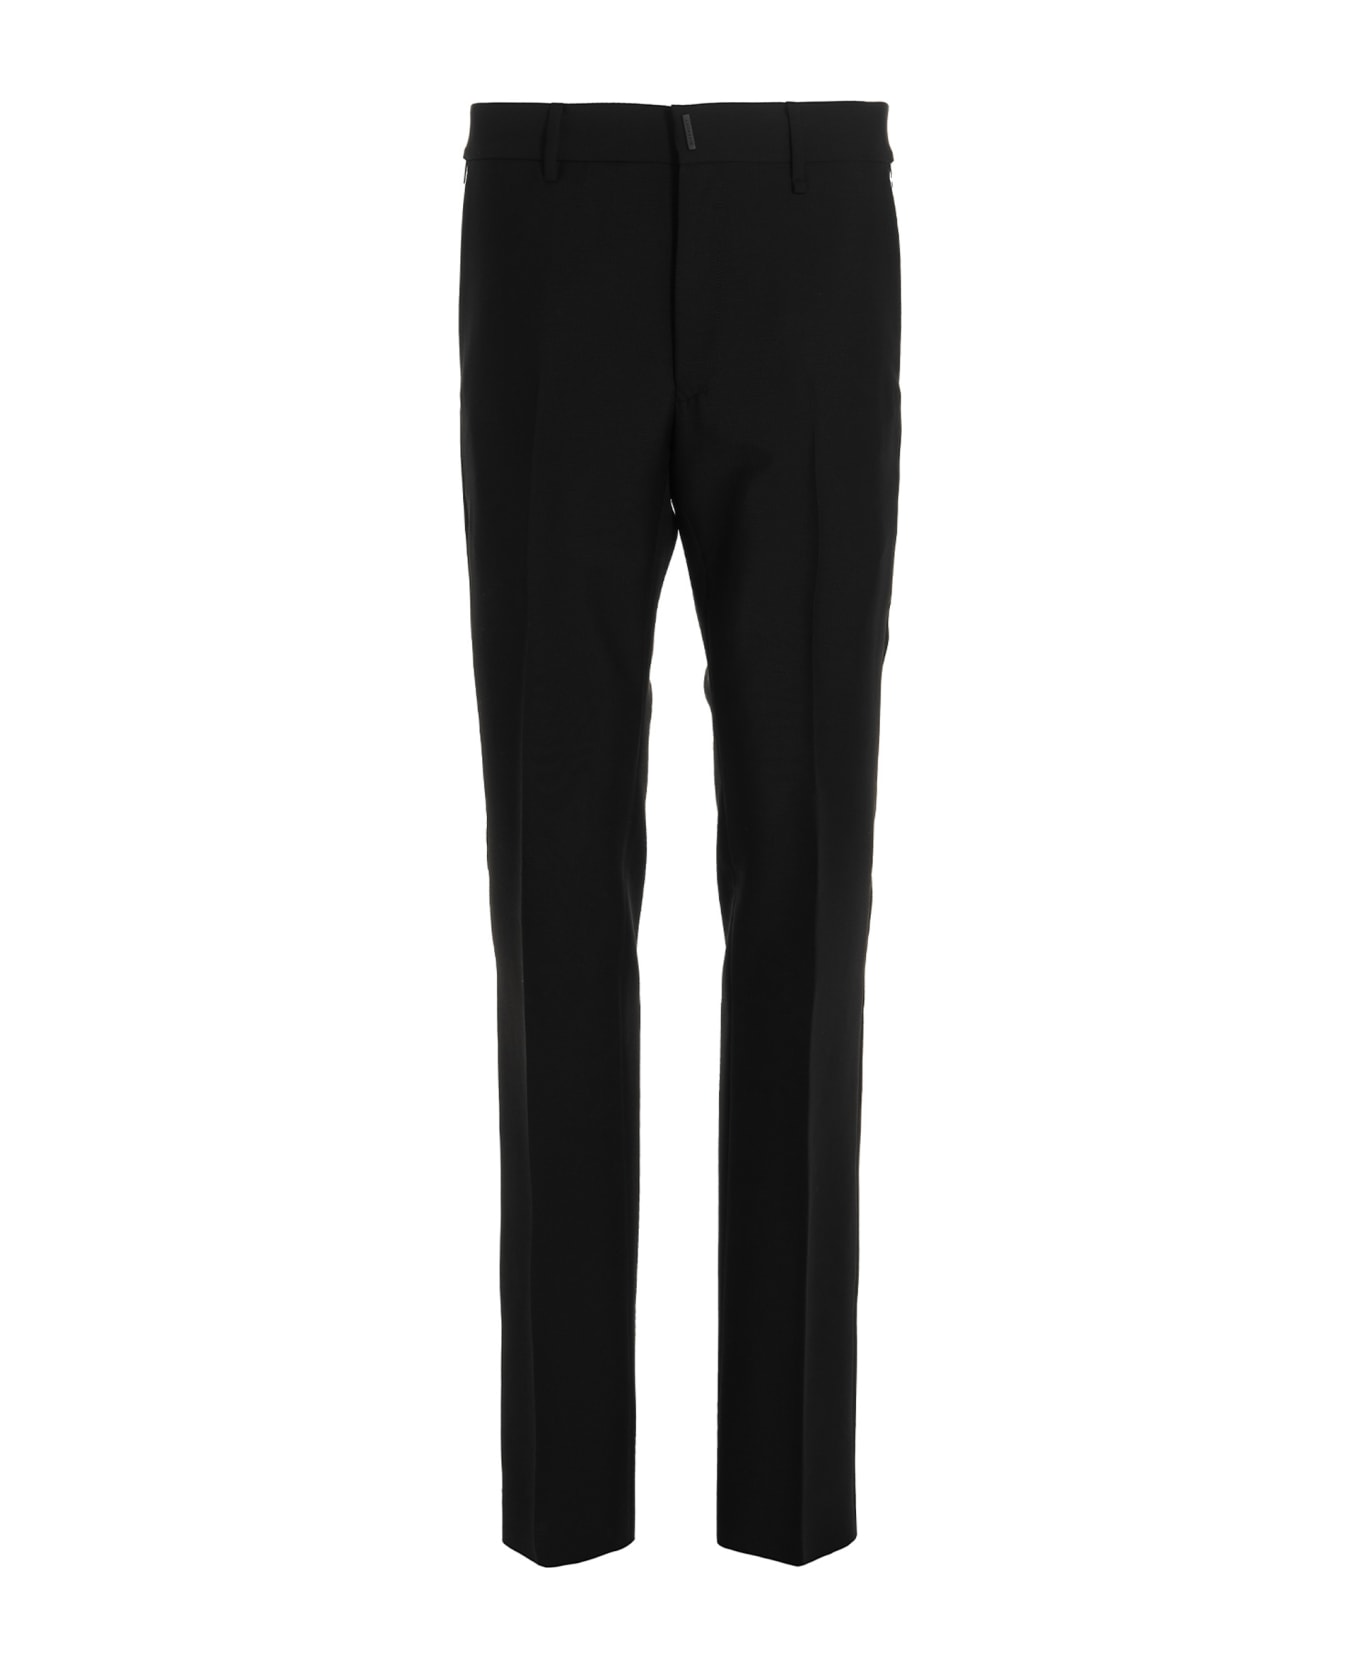 Givenchy Mohair Wool Pants - Nero ボトムス